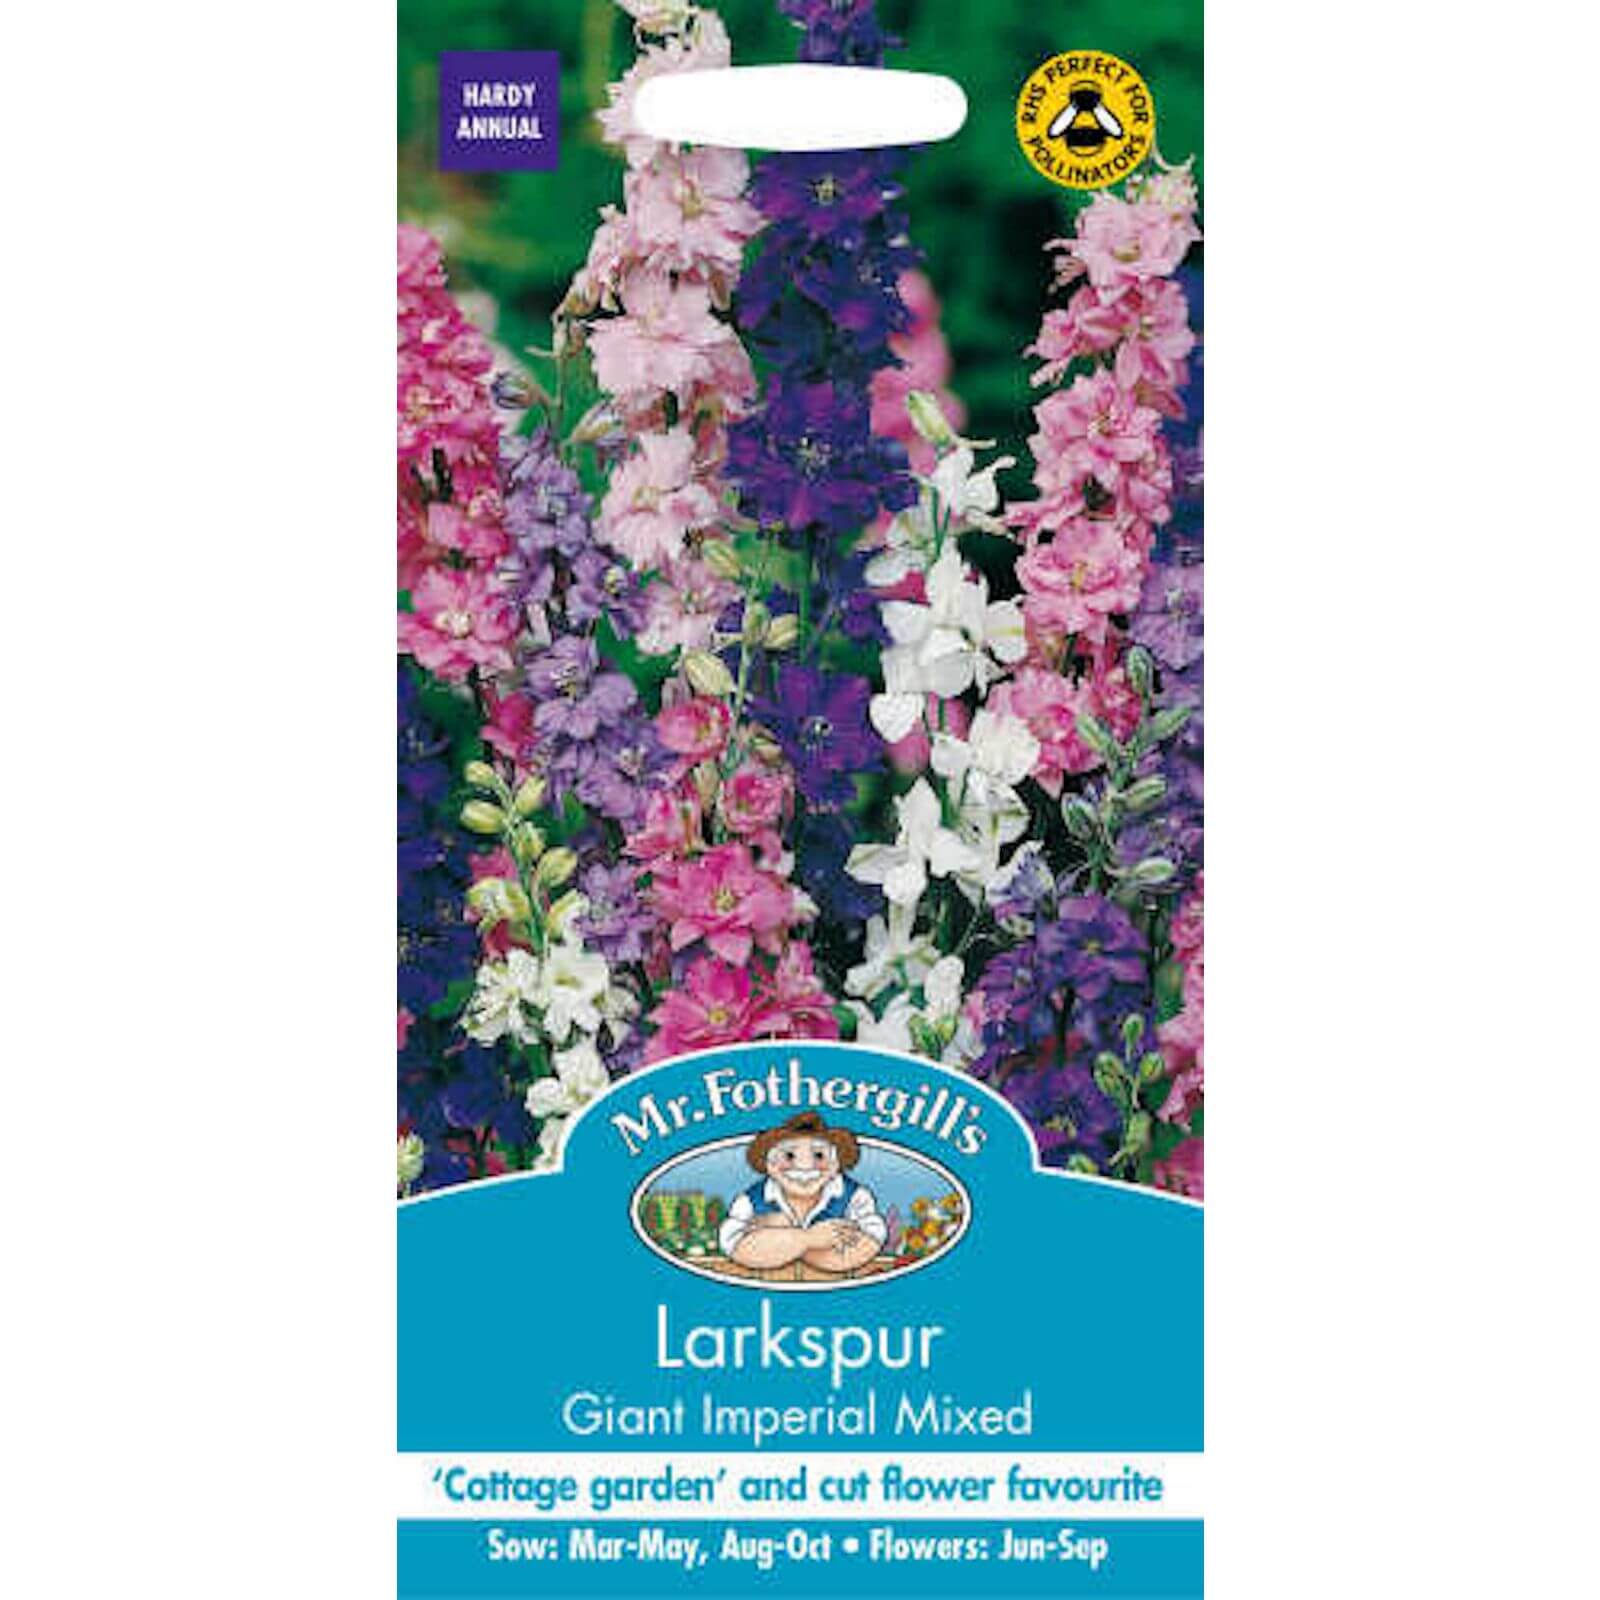 Mr. Fothergill's Larkspur Giant Imperial Mixed (Consolida Ambigua) Seeds